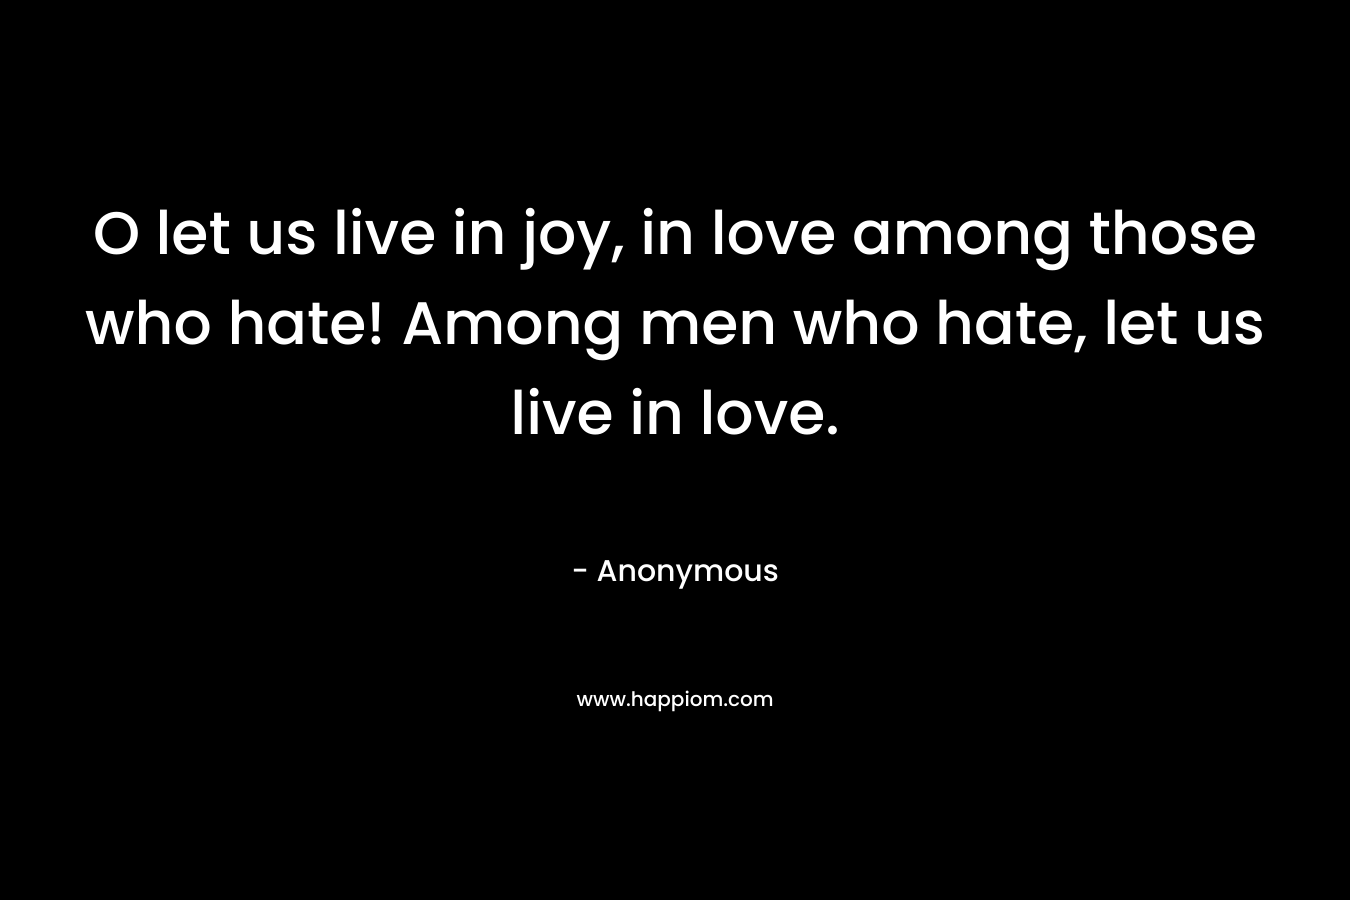 O let us live in joy, in love among those who hate! Among men who hate, let us live in love.